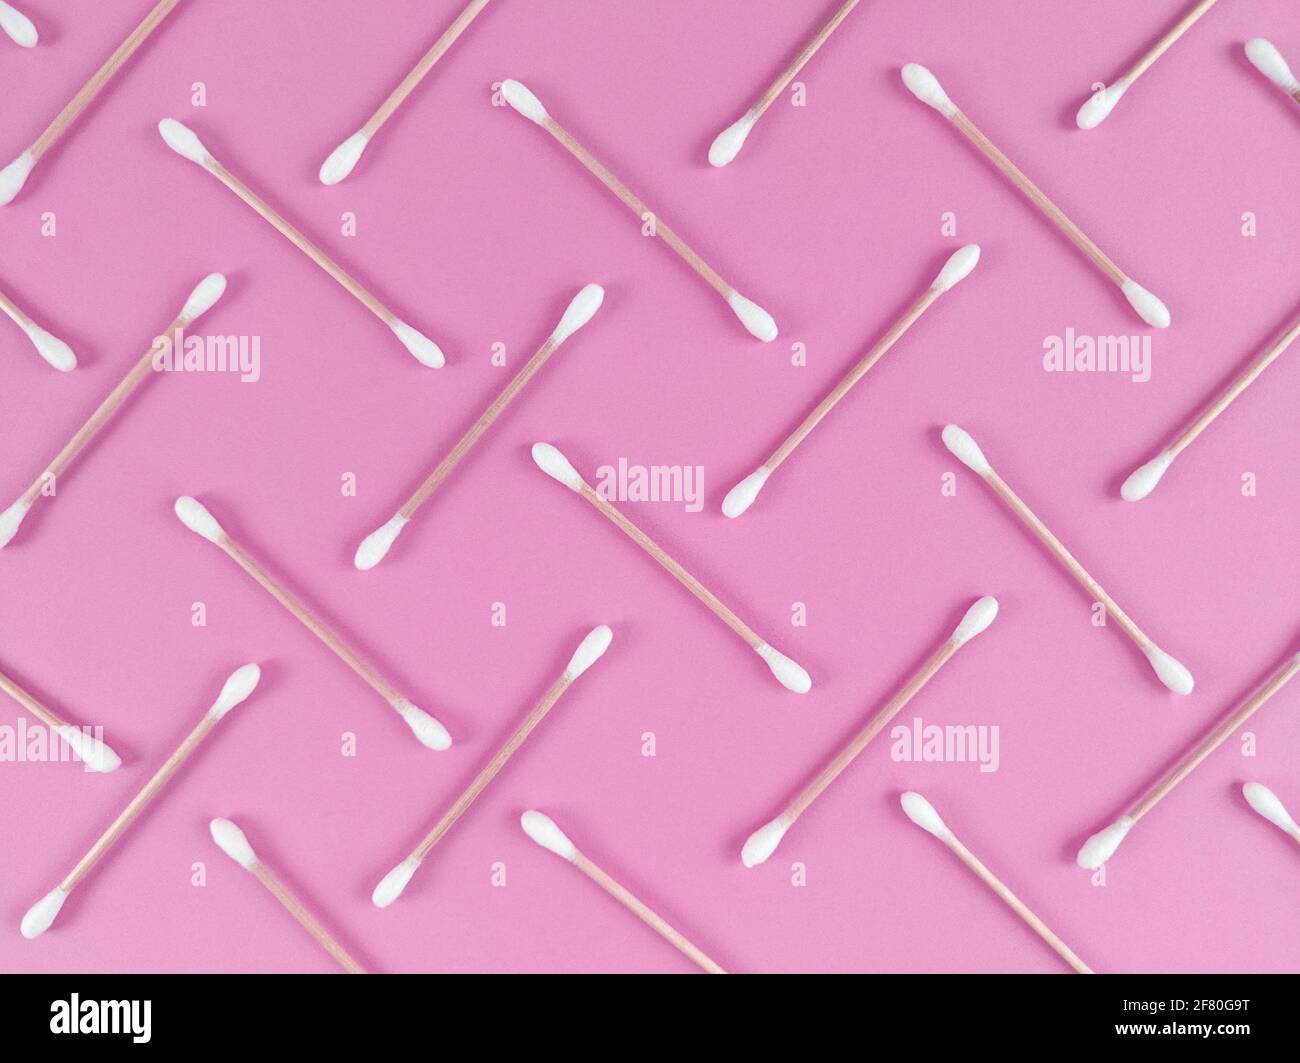 Pattern made from bamboo cotton buds on pink background. Stock Photo